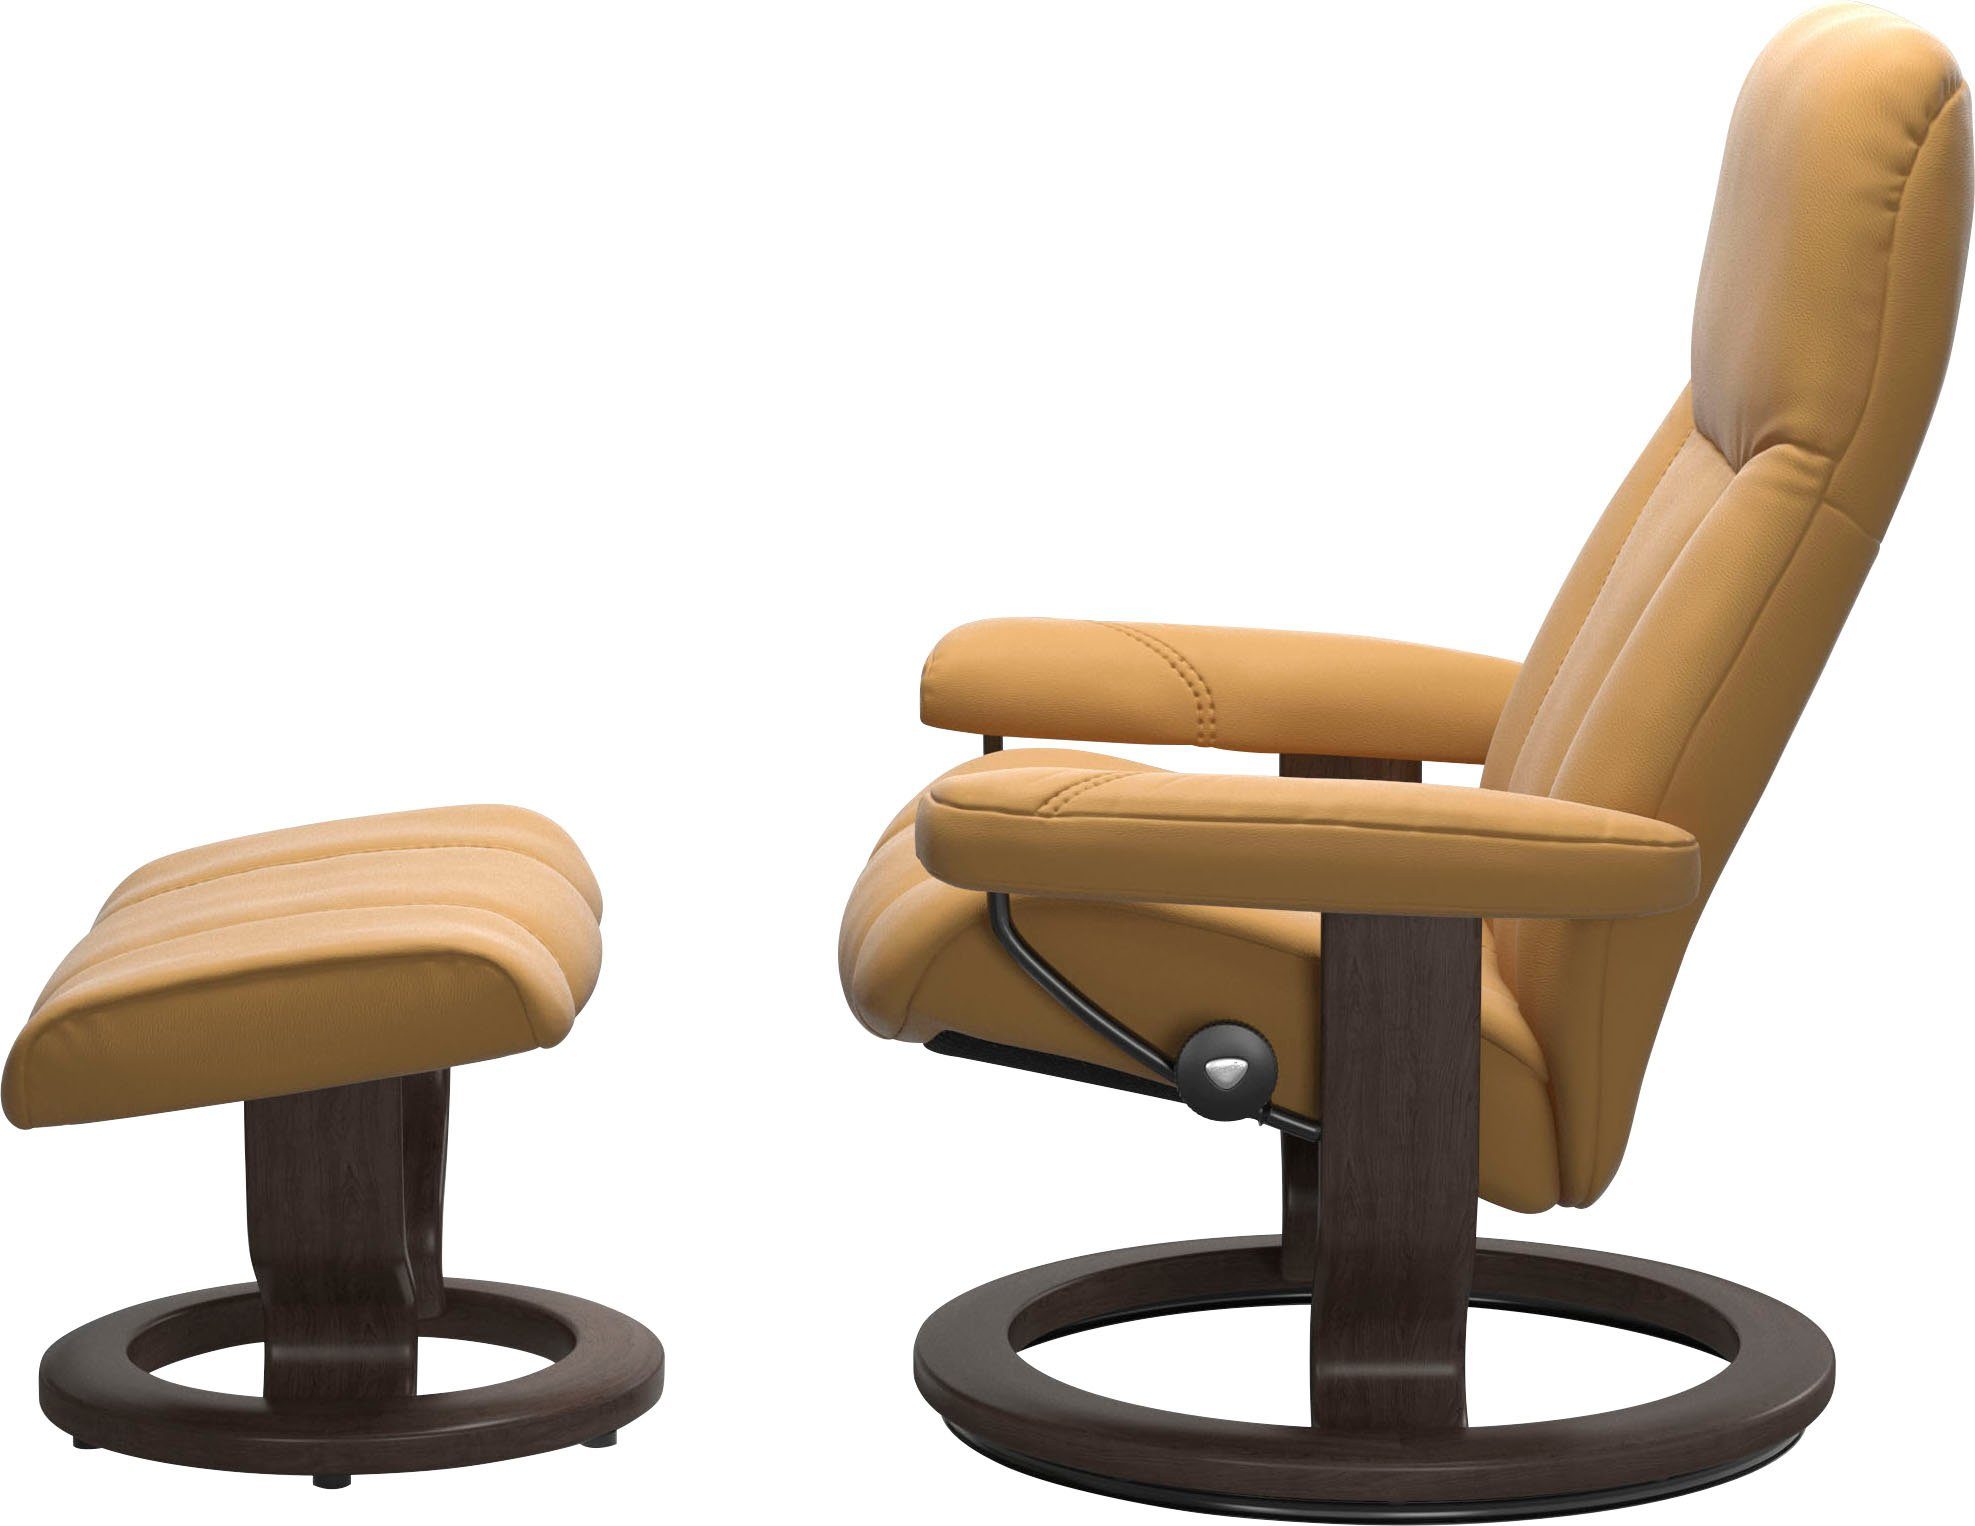 S, Wenge Stressless® mit Classic Größe Consul, Gestell Base, Relaxsessel